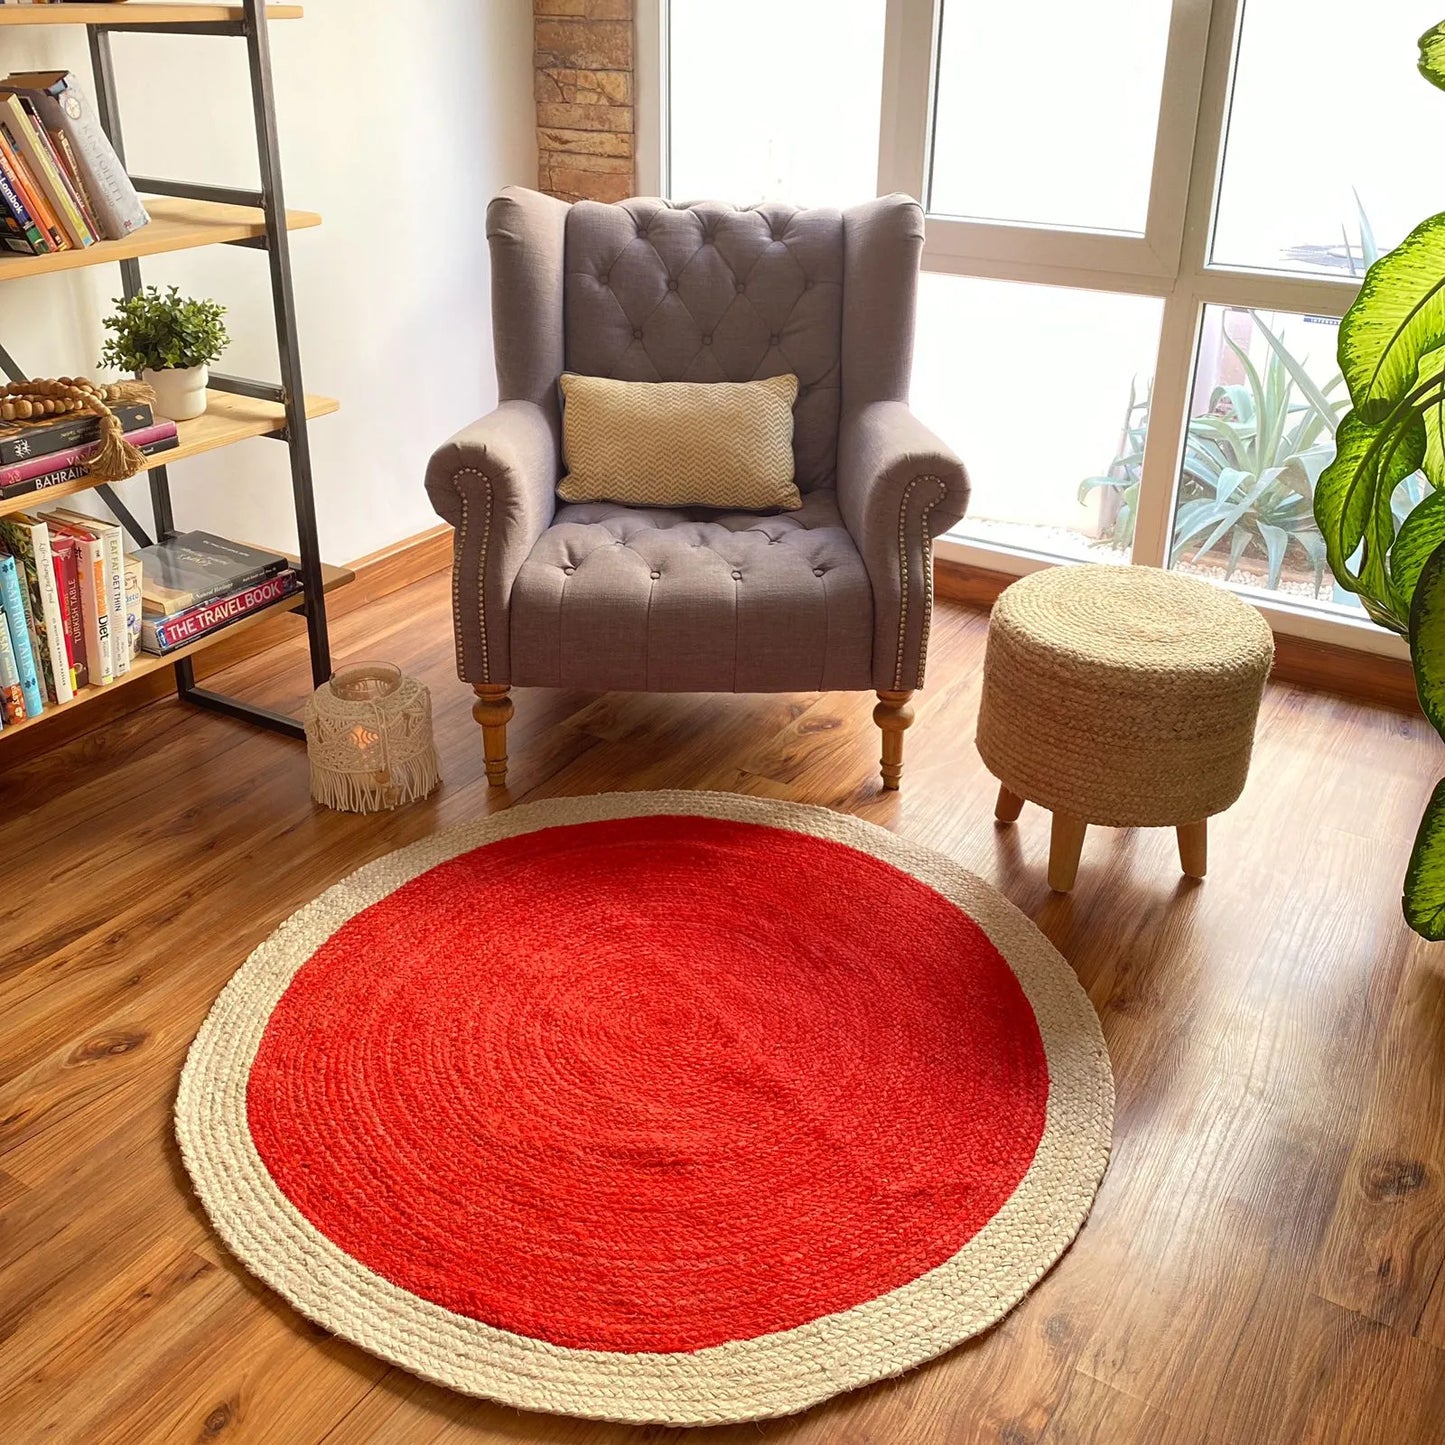 Avioni Home Eco Collection – Handmade Jute Round Rug – Red Center with Natural Jute Border